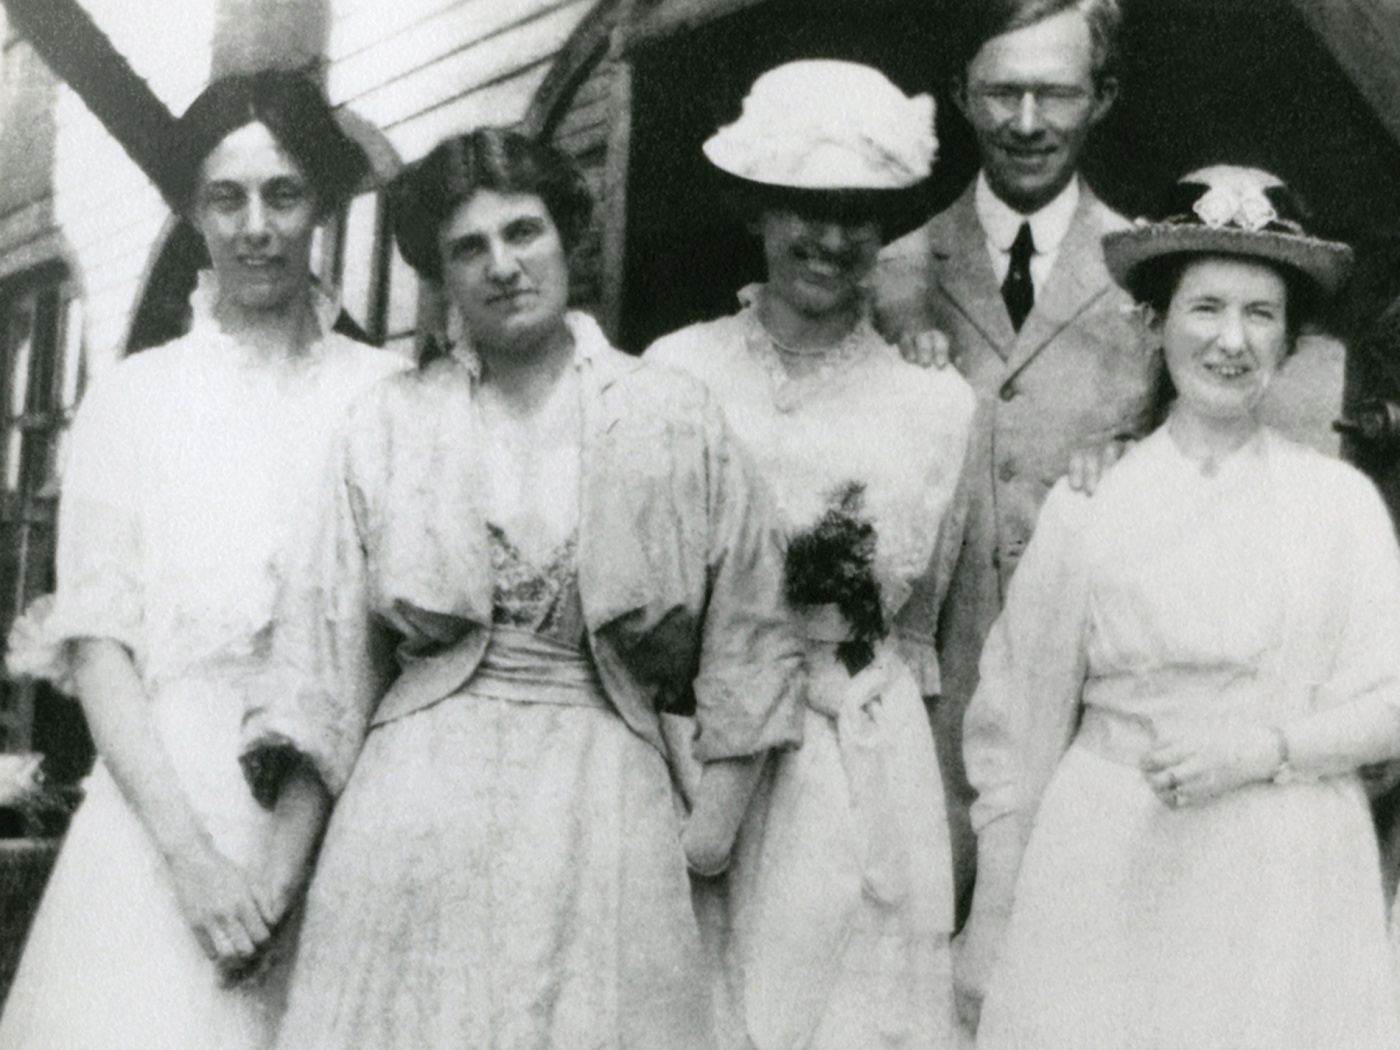 Morriss, second from left, at Mount Holyoke 1915.